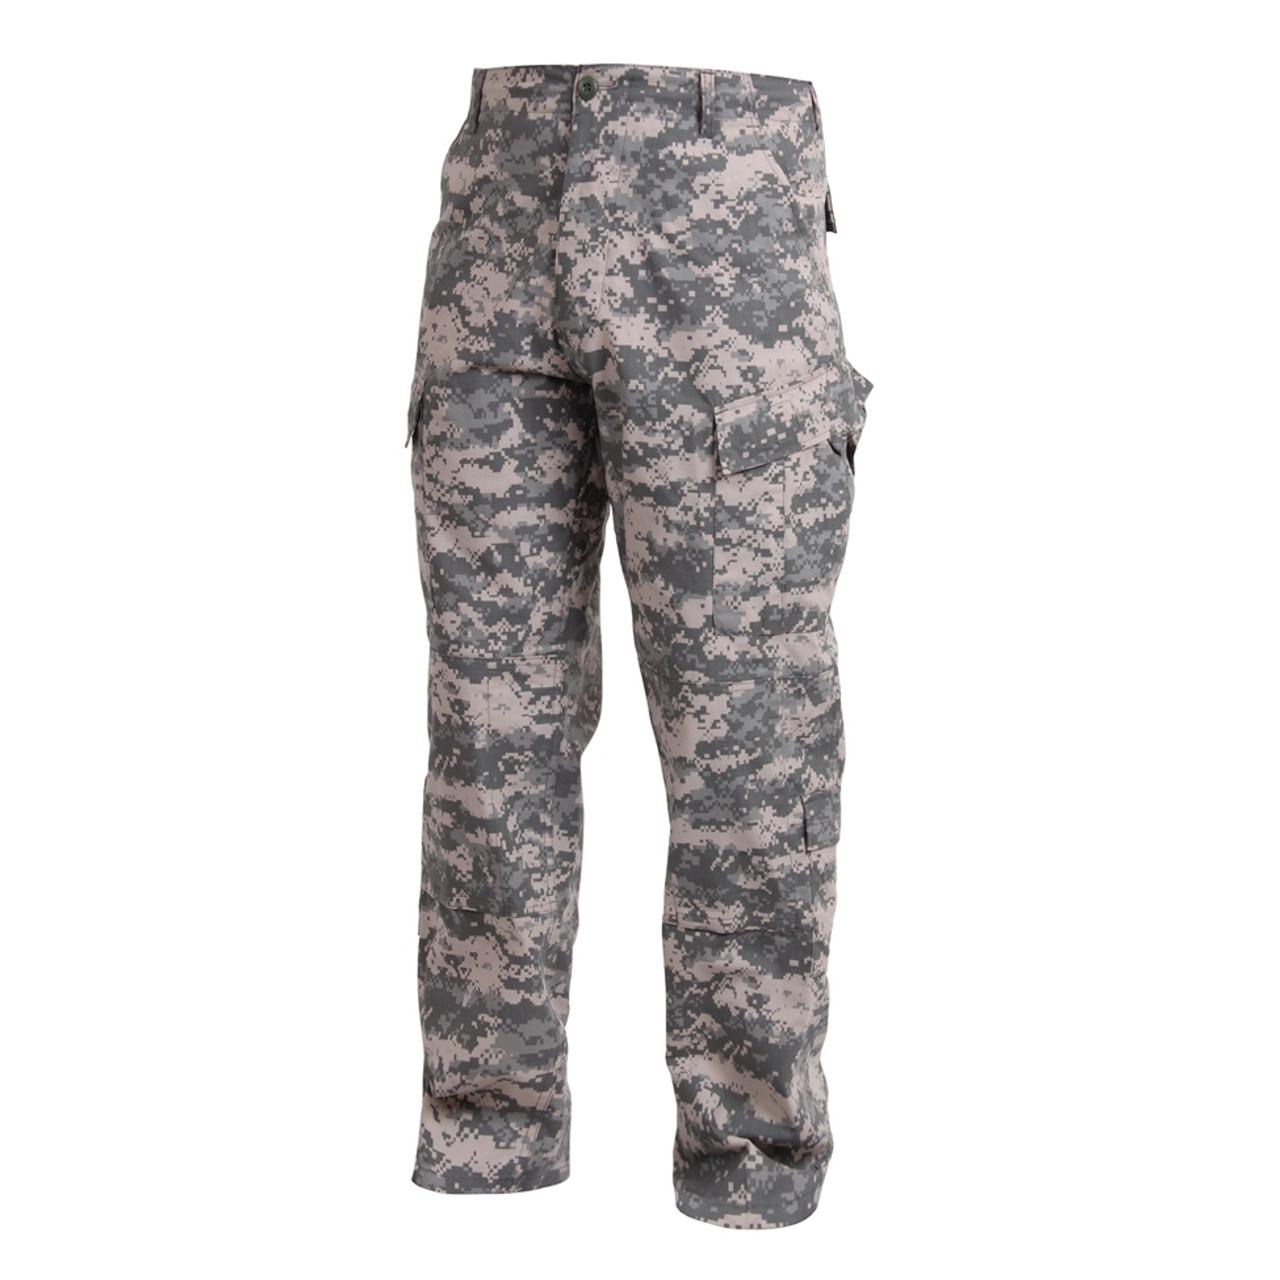 Army Fatigue Pants | Military Fatigues | Fatigues Army Navy Gear